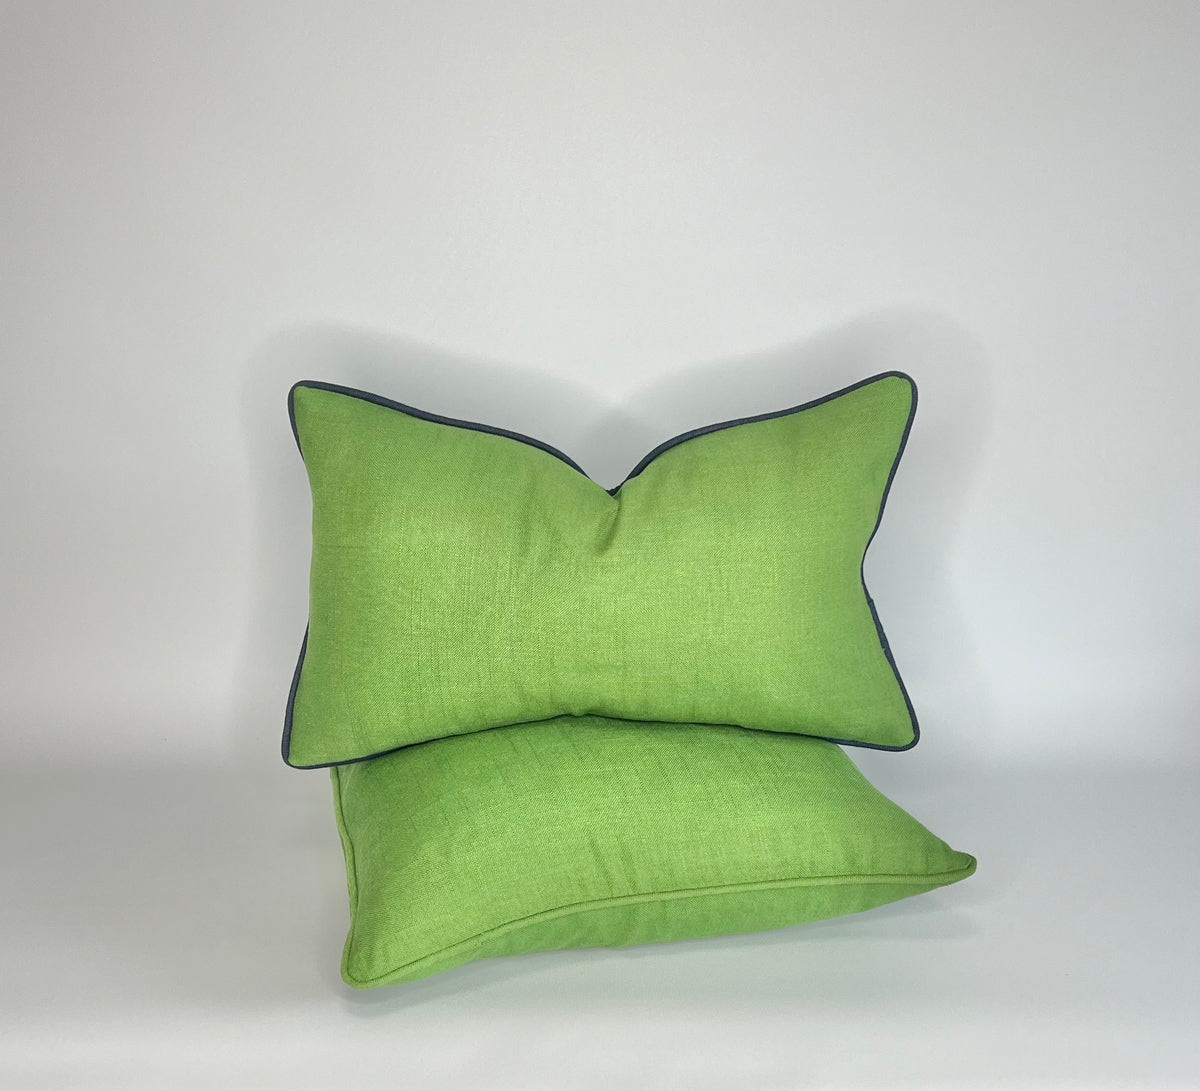 Decorative Pillow Cover in Solid Green Linen Fabric